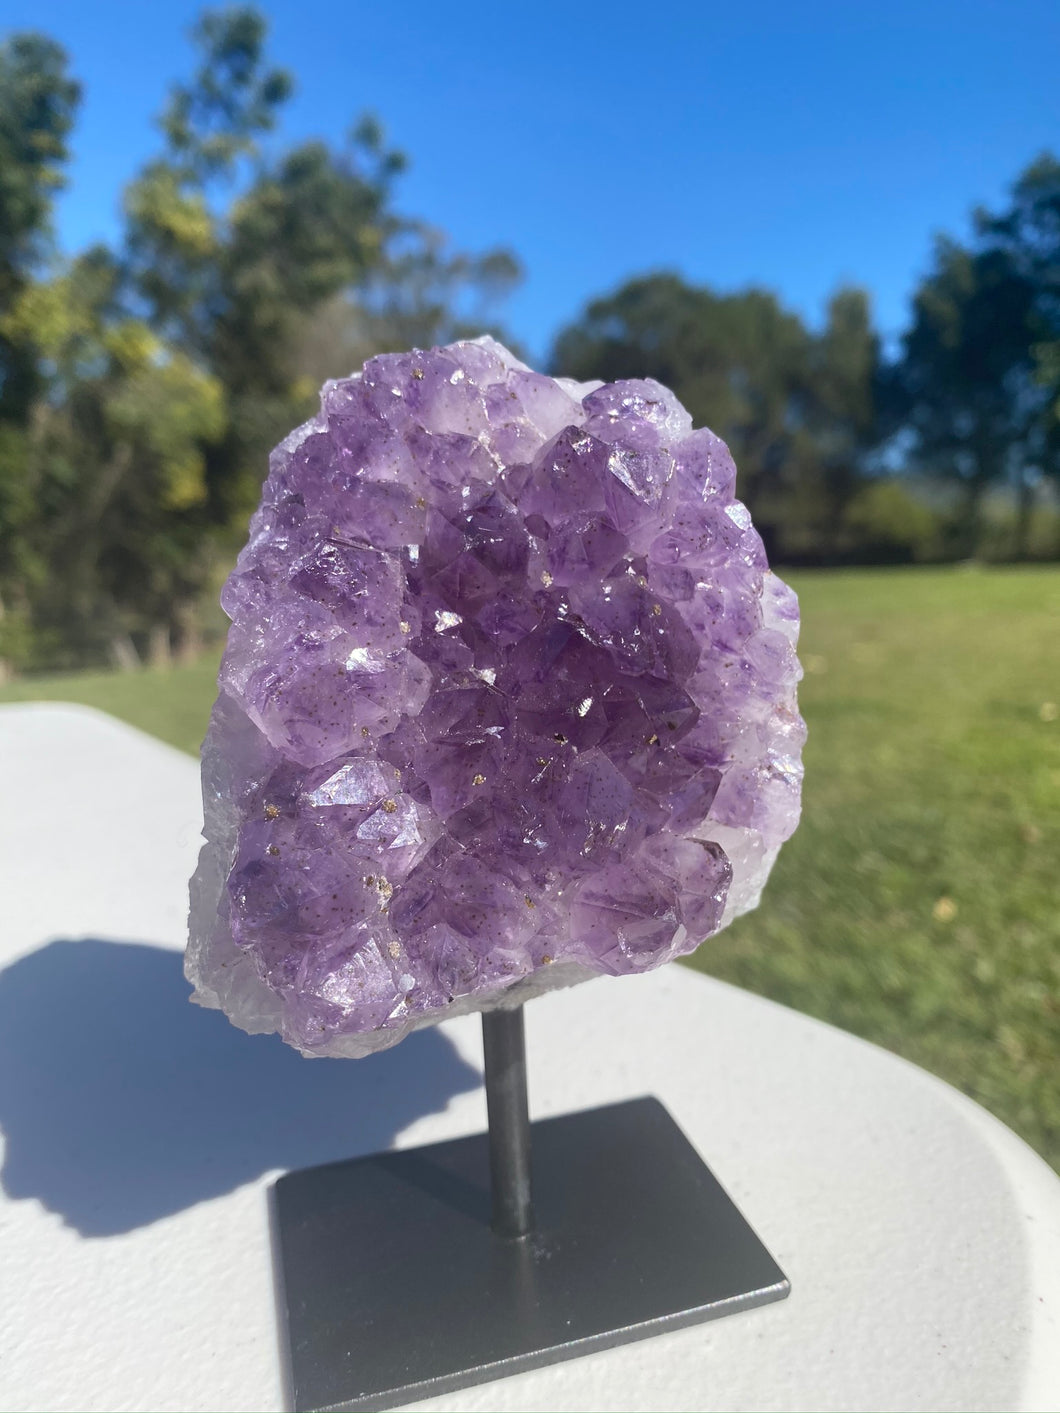 Amethyst Crystal on display stand - home décor or unique table piece